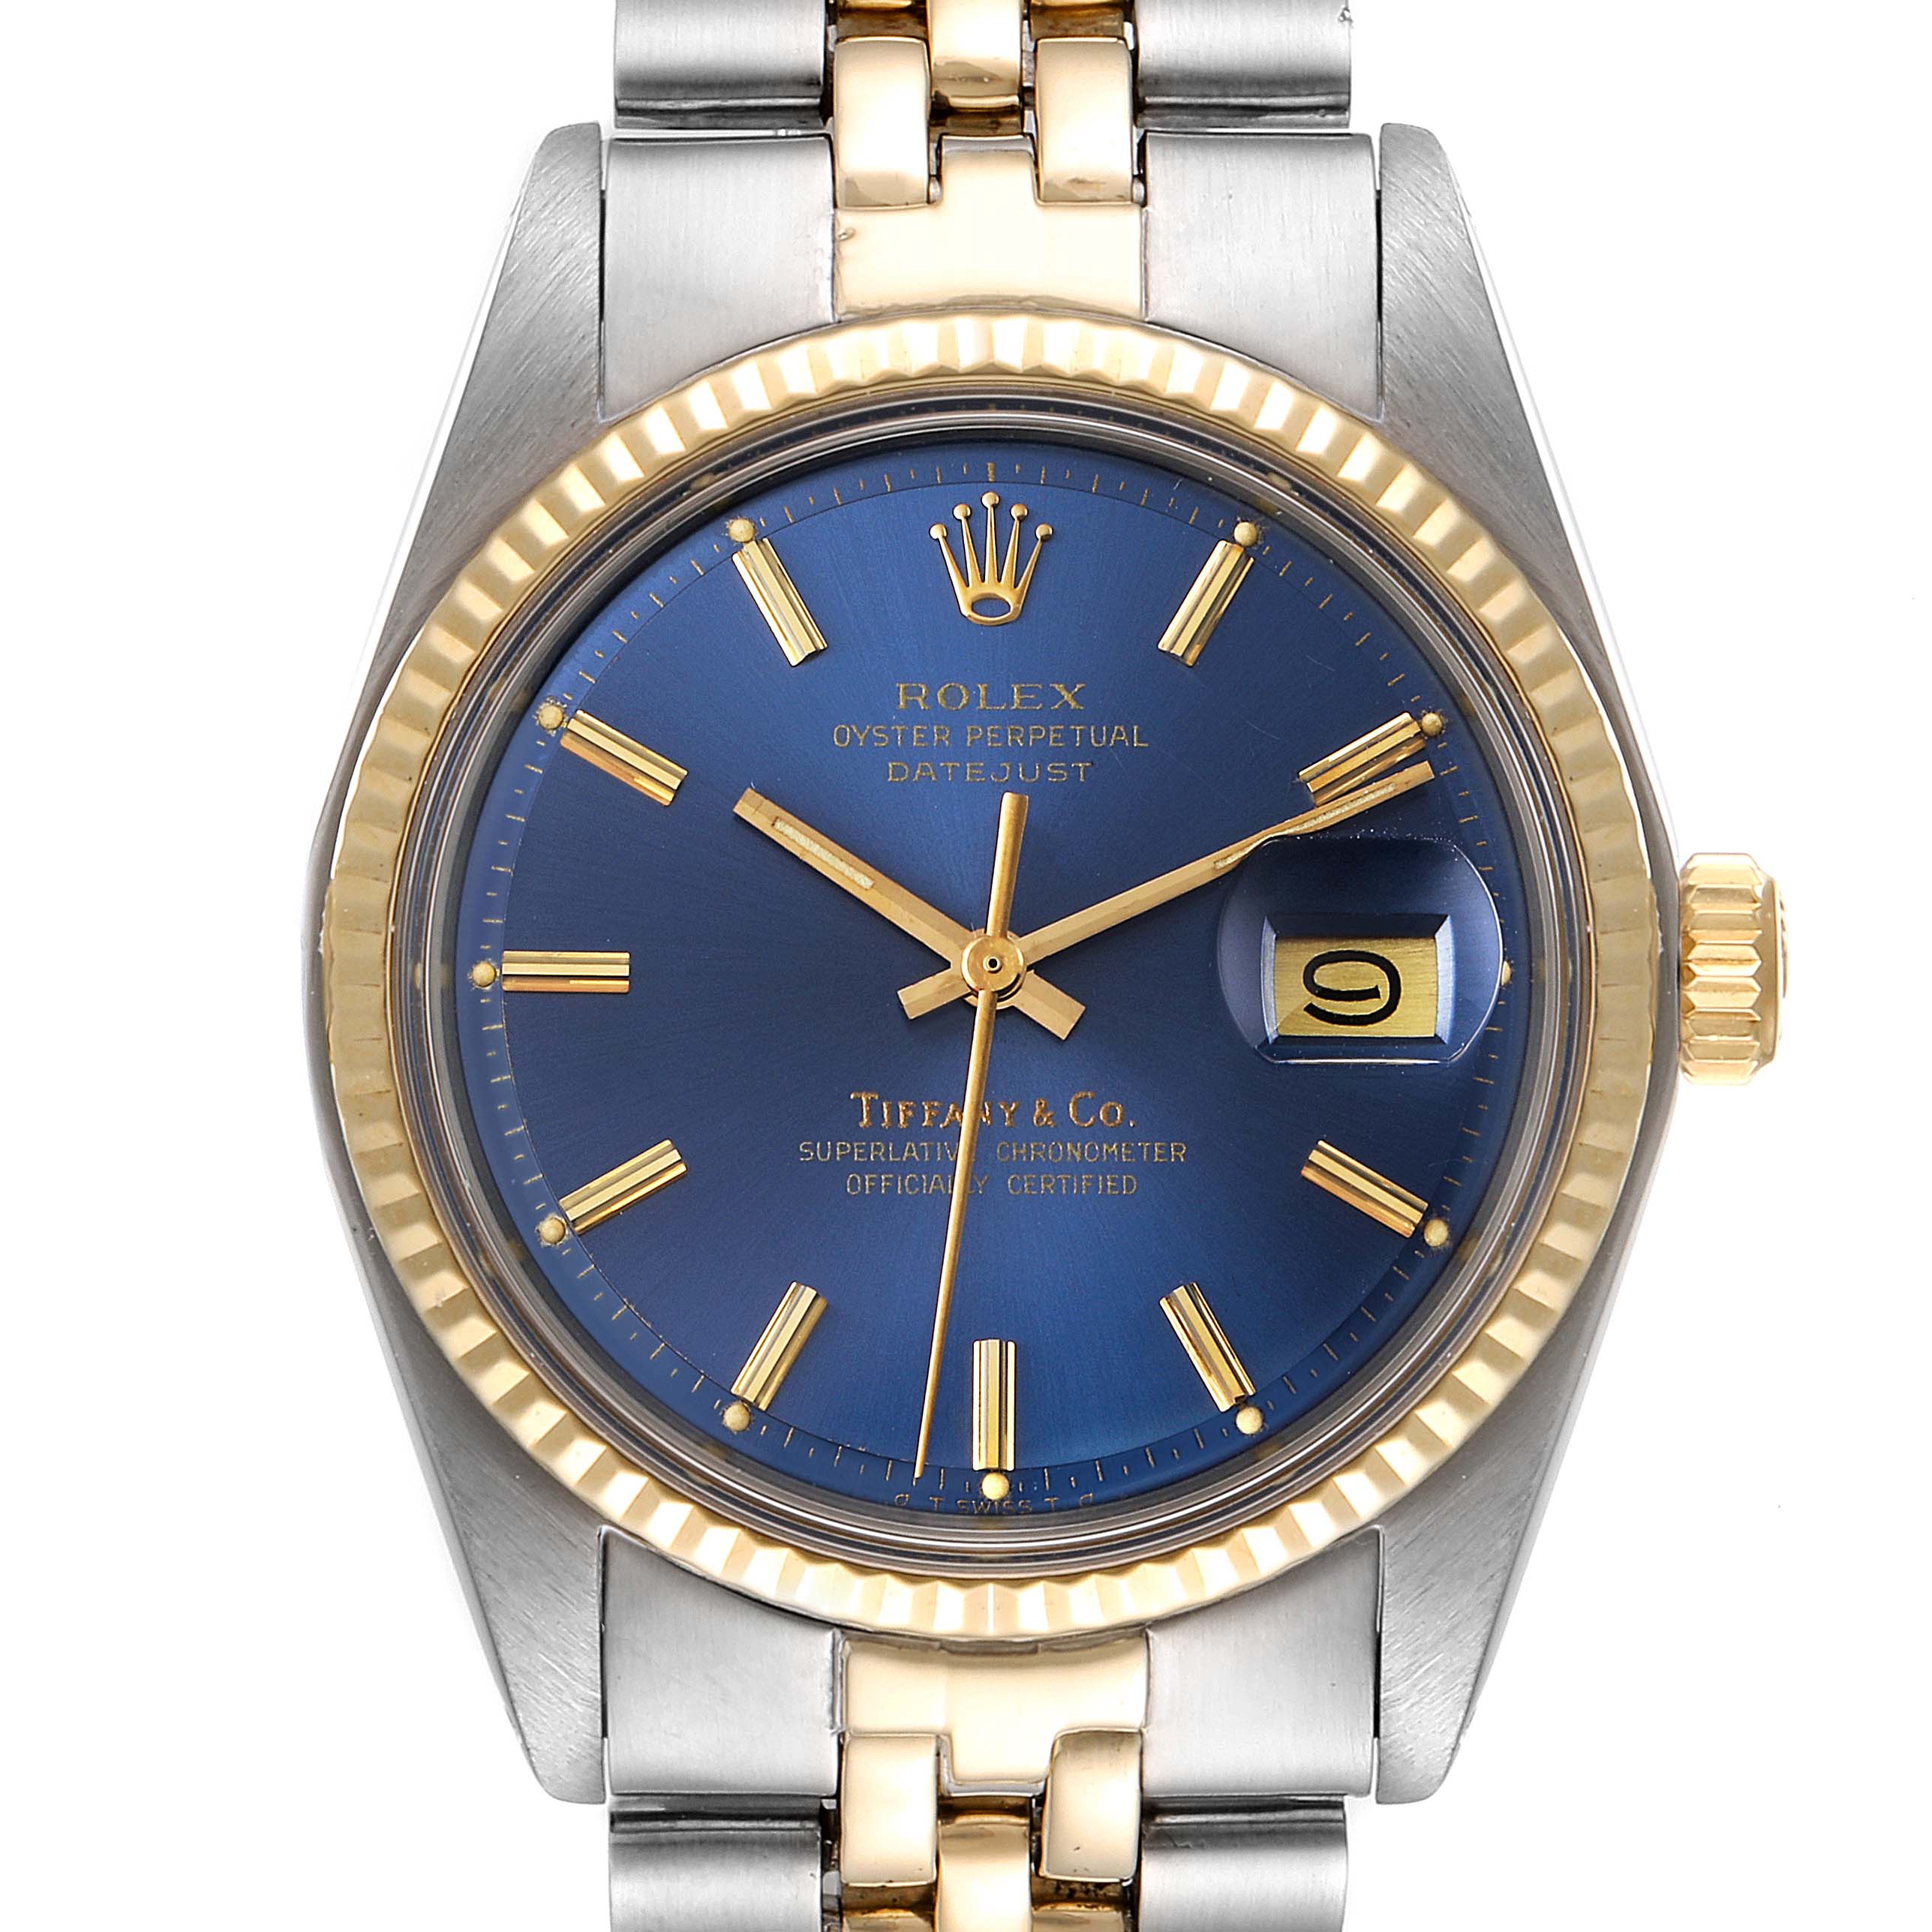 Rolex Datejust Steel Yellow Gold Blue Tiffany Dial Vintage Mens Watch